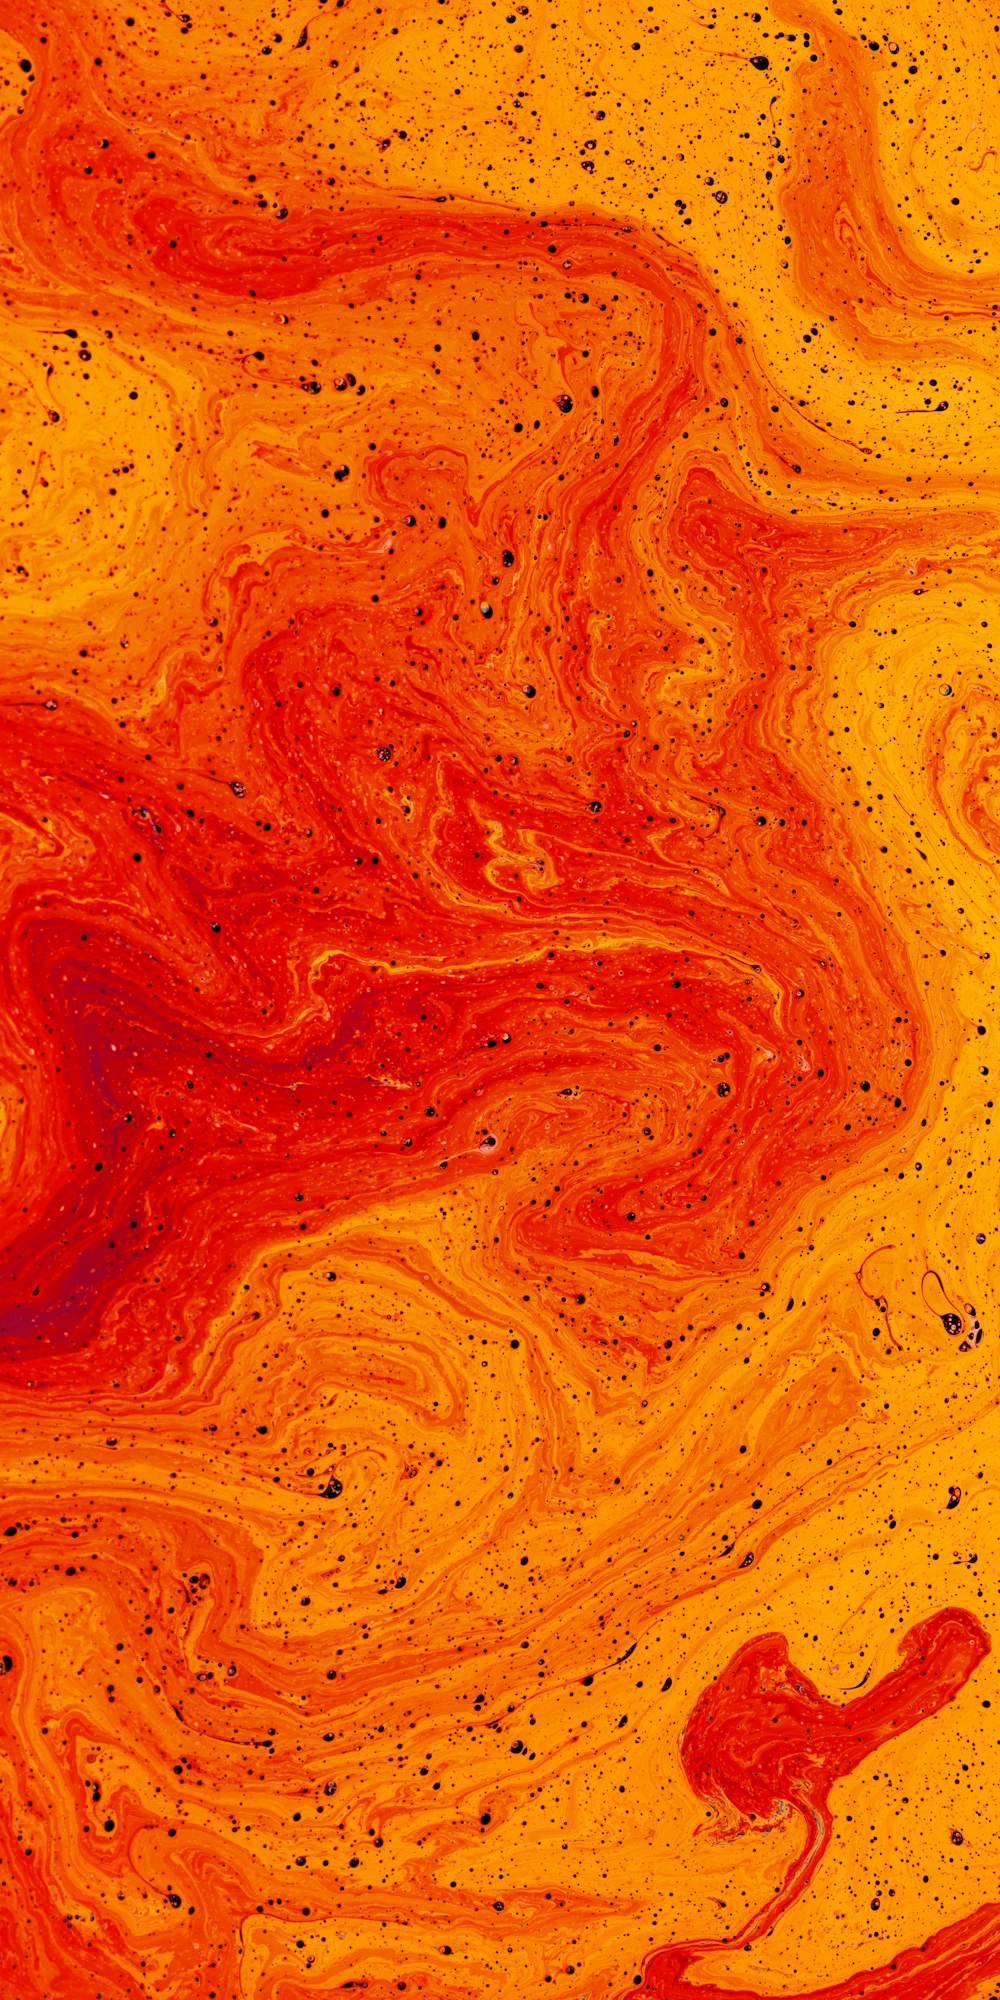 an orange and red substance with black speckles